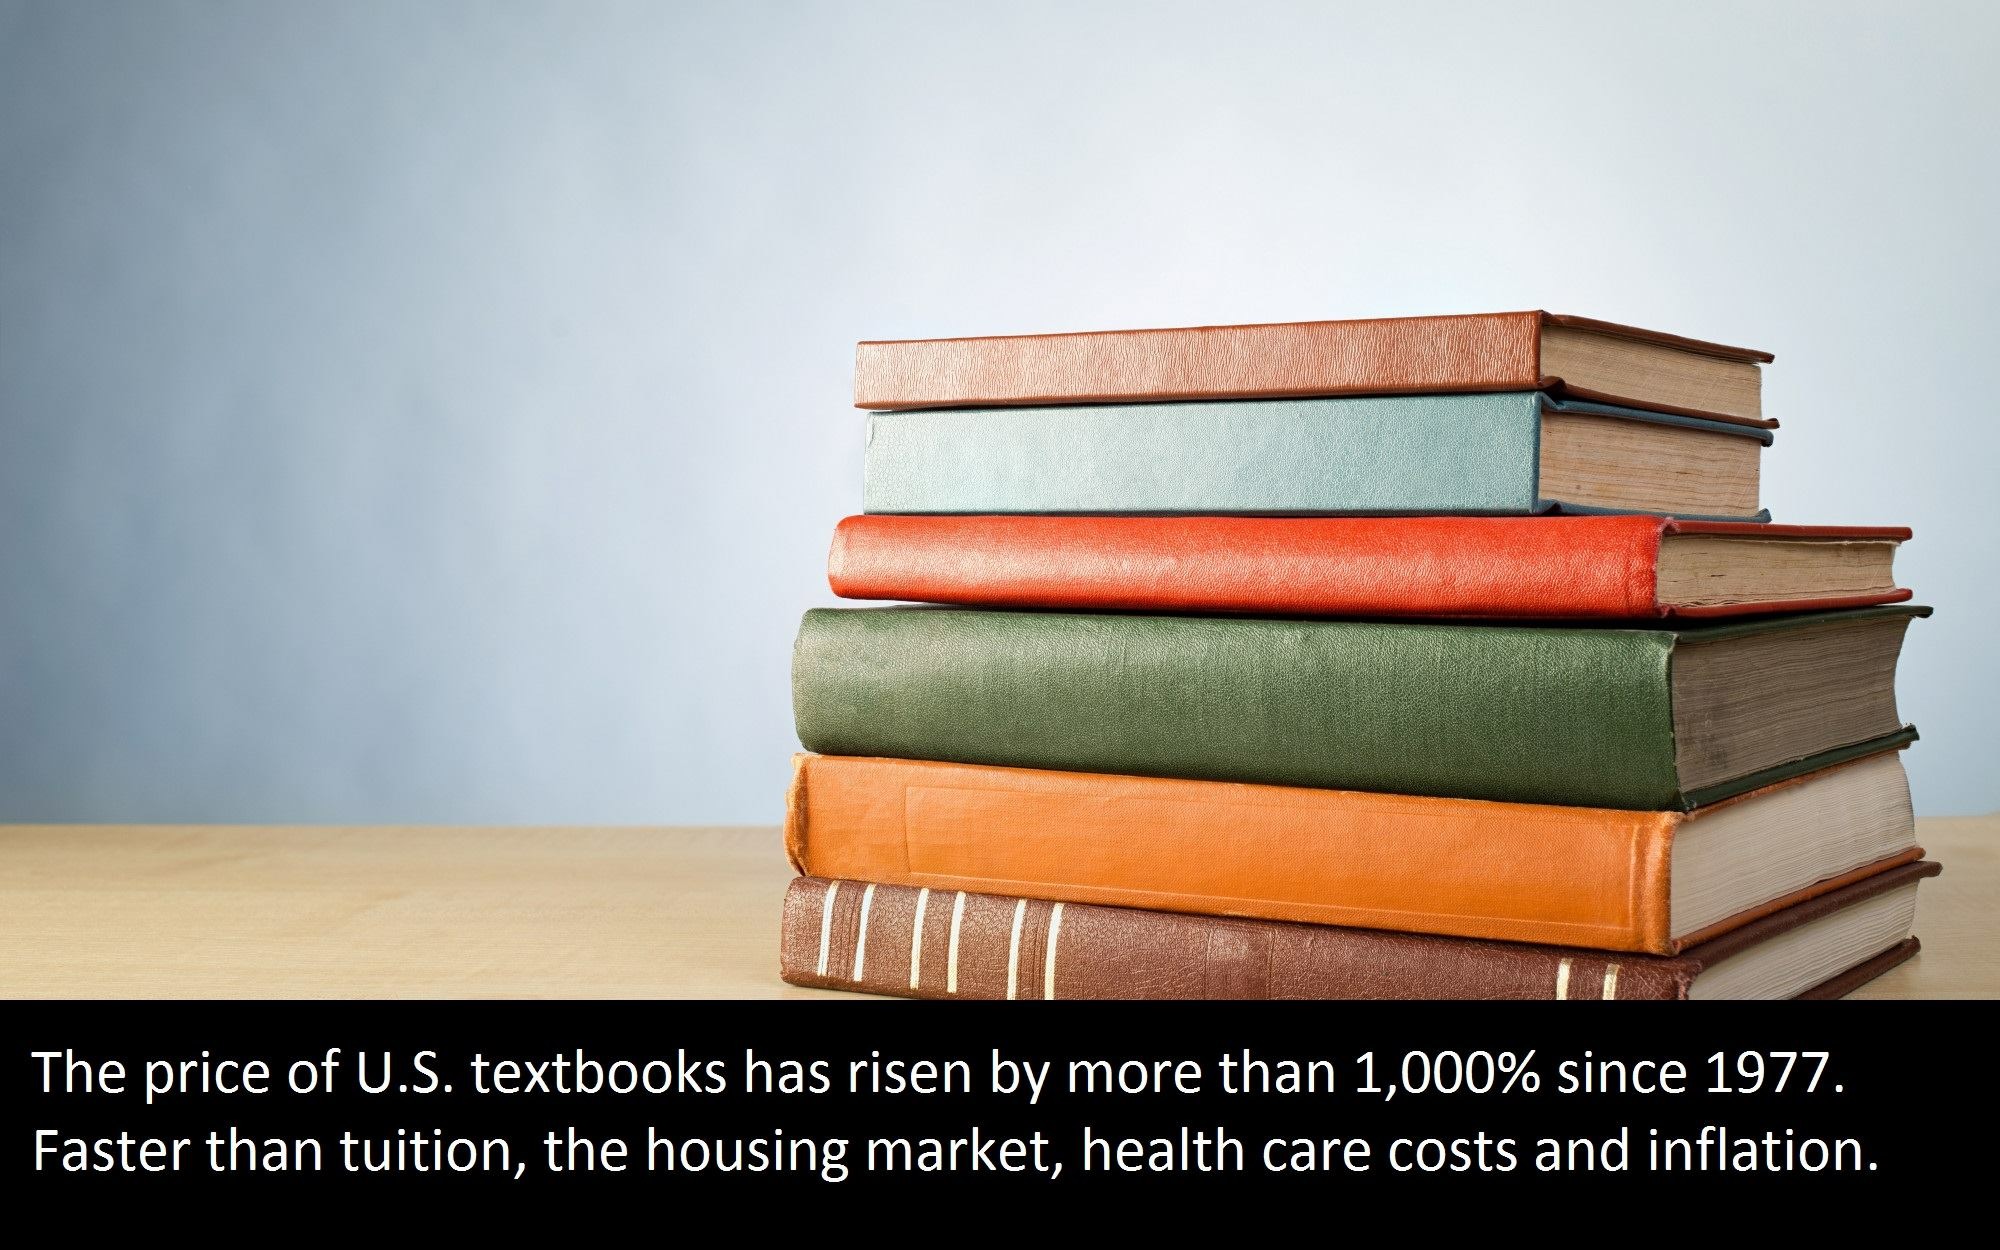 Book - The price of U.S. textbooks has risen by more than 1,000% since 1977. Faster than tuition, the housing market, health care costs and inflation.